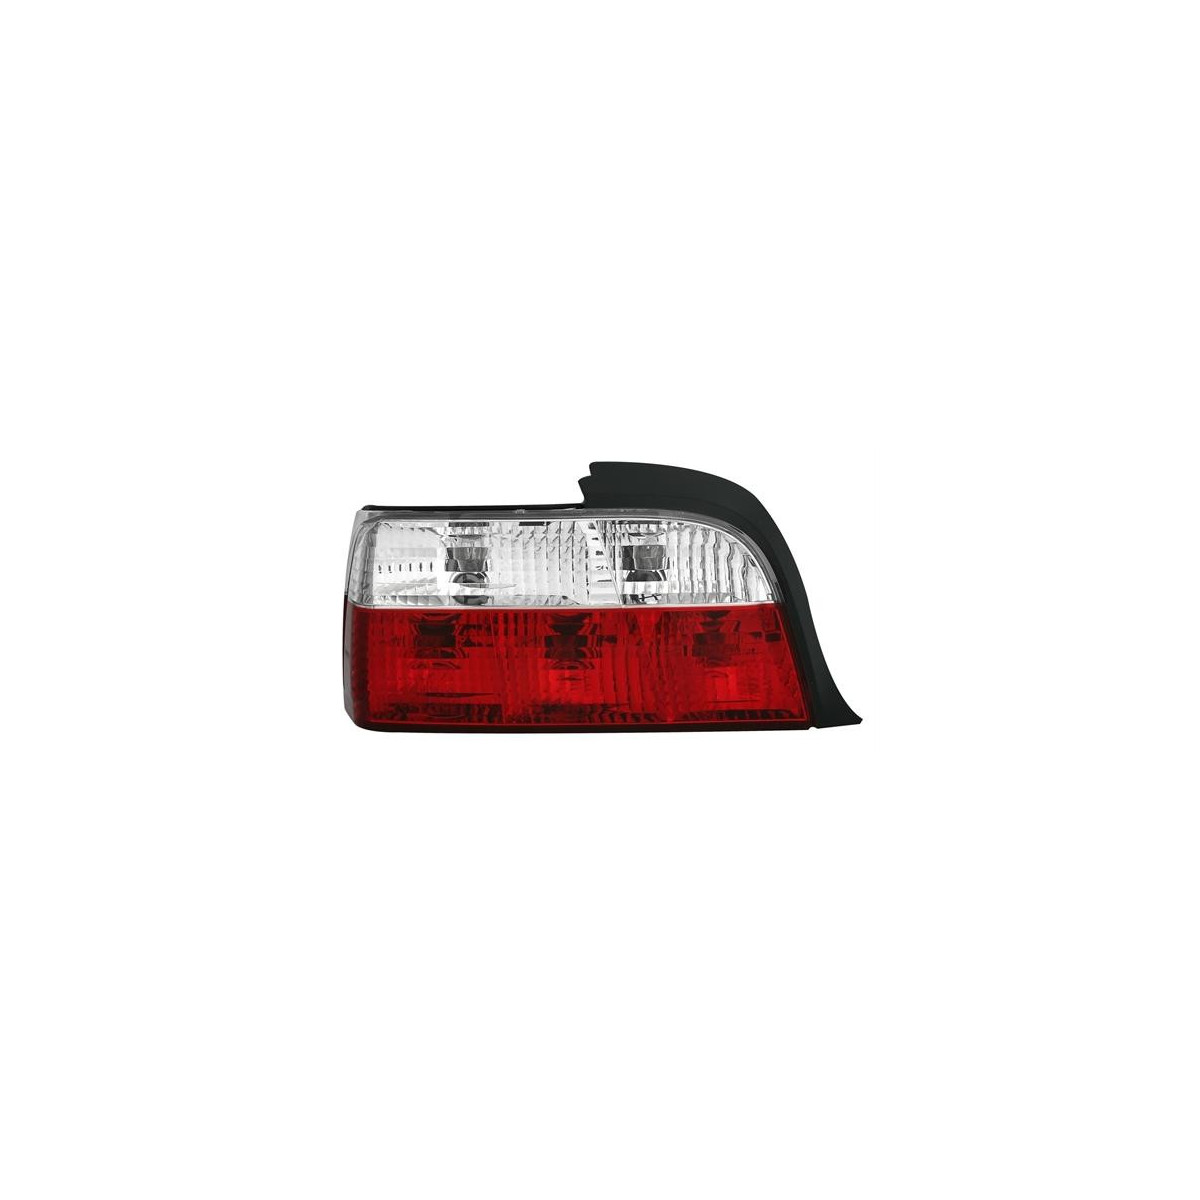 LAMPY TYLNE RED/WHITE BMW E36 COUPE